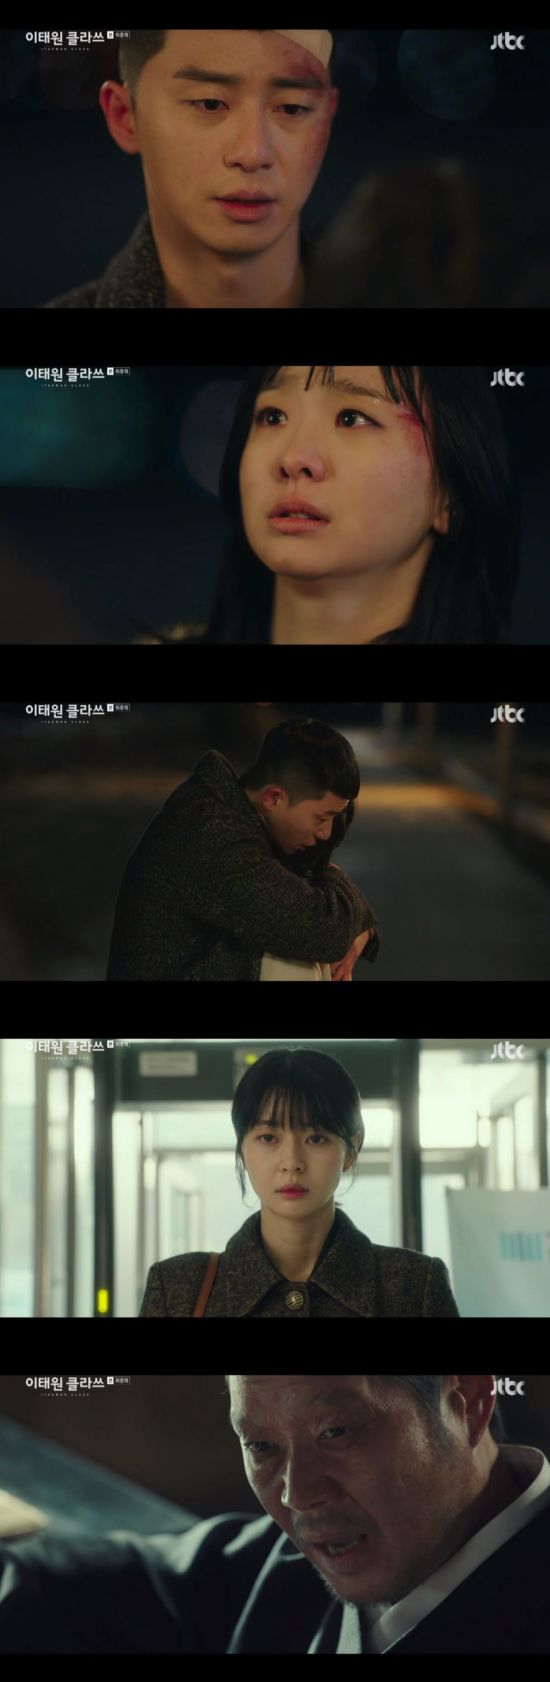 On the afternoon of the 21st, JTBC Itaewon Clath concluded the final meeting with Park Seo-joon, who succeeded in revenge and made a fruit of love with Joe-yool Lee (Kim Dae-mi).On the day of the show, Park knelt before Chang (Yoo Jae-myung) to save Joe-yool Lee.At the end of the I have fallen to my knees, Mr. Chang laughed, Where are you going to go and kneel in this shit.The new Roy asked, Where is the Fountainhead? And Chang said, Im out of my veins. Its not trivial.I have abandoned my son again in exchange for that trivial knee. Then, when Chang asked, How do you feel now?, The new Roy answers, Im sorry. And How do you feel, Mr. President?I am glad to kneel like this. I am excited. He said, I had to admit you even though my values ​​are different.Meanwhile, Joe-yool Lee and Jang Logistics (played by Kim Dong-hee) were caught by Jean Fountainhead (played by Ahn Bo-hyun) while trying to escape.Joe-yool Lee and Jean Logistics are armed to fight the Fountainhead gang, but they just laugh.As soon as he was about to attack, Seo-yool Lee ran away, saying, Logistics be strong! And Logistics alone faced the Fountainhead gang.Eventually, Logistics falls with a fatal wound to his leg.When Kim Hee-hoon (Won Hyun-joon) raises his hand to beat the victory once more, Jean holds his arm and stops him.Jean The Fountainhead advises Logistics, Just stay asleep, and the winning ticket says, I have never gotten what I want in my life.But you and me and my brother are in trouble, and always the way is wrong, he said, complicating The Fountainhead.Meanwhile, Joe-yool Lee, who was running away alone, is discovered by the Fountainhead gang.The Fountainhead gangs are trying to catch Joe-yool Lee running through the field, when Roy and the passer-by drive up and hit the Fountainheads car.Seeing the new Roy getting out of the car, Seo-young Lee was surprised by the pleasure and ran to Chief!And for a moment theyre happy, Jean says, Im so tired. Im here to die. On your feet.Kim Hee-hoon also said, Why do not you just stay? And the new Roy responded, I am on my way to the police, so just go.Then, when the new Roy and Seo-yool Lee run away with their hands, the winning ticket remains there and confronts Hee-hoon.The Fountainhead drives alone, chasing the new Roy and the Seo-yool Lee.Joe-yool Lee supports Roy, who is sick of his head while running away, and the new Roy suddenly says, I think I ran in Itaewon, he tells Seo-yool Lee.My mind is full of you, and I wonder if you were such a mind. I love you. I love you, its Seo-young Lee.Impressed, Seo-yool Lee hugs the new Roy.The Fountainheads car comes fast to the hugging new Roy and Seo-yool Lee, who throws a stone into the windshield and stops.The new Roy tells Seo-yool Lee to run away alone, and Seo-yool Lee escapes the position, saying, If the representative dies, I will die.As Seo-yool Lee flees, the new Roy engages in a blood-stained fist fight with The Fountainhead with a monologue: Its all over today.On the other hand, Oh Byung-hun (Yoon Kyung-ho) finds Seo-yool Lee who was running away, and saves Seo-yool Lee.The new Roy succeeds in throwing sand into The Fountainheads eyes, subduing the steamer and blowing it into one shot.And Seo-yool Lee comes to rescue the new Roy with Oh Byung-hun, who is relieved to say, Now, lets be happy.Jangga will be investigated for bribery and embezzlement over accusations by SuA (Kwon Na-ra); Jang, who has been subjected to a seizure search, is distressed.In discussing measures with Kim and Jang, Chang says that he can use it all by himself.When Logistics says the board is considering a sale, Chang disapproves; Logistics says there are places that have offered good terms.Lee Ho-jin (DiWitt) who visited The Fountainhead directly tells the news of Janggas takeover merger.When Chang says he will be arrested soon, Jean says, Youre a bitch! But Lee Ho-jin says, Dont frown. All right.I forgive you, he says, and leaves.Chang calls around for help, but mostly refuses, or never answers the phone; Logistics says, Theres no more way, my fathers favorite lion language.We are literally weak, we are eaten. Jang said, and he kicked out Logistics.The chairman, who is in a corner, calls Kim and says, I have not had a long time to live.However, Mrs. Kim blames Chang, who lost his initials, asking Chang why he is doing Vic-Fezensac now, and also refuses to say, There is a guy who holds a knife.Chang visits Roy, who boils the stew of the tofu to the chairman who came to him.Park said, I am thinking about a merger of Jangga takeover, said Park, who is eating a stew. The operation will be done by Kang.Im going to throw away the name Janga, he adds.But Chang only asks who taught him, and Roy says he learned from his father, and he especially devotes himself to meju powder.I was treated to such a delicious meal, but I did not bring the money. I can not replace it with something else, he said.And I cry, pleading for all the troubles and pleading for the wrong thing.I wanted to draw it, but I do not like it. Do I look like a hogu?I am a Vic-Fezensacc, he says, and advises him to do business.The most important thing in Vic-Fezensac is to value people, trust, and trust rather than money, said Park, who took over the market at the general shareholders meeting.I will make a new prosperity with you. He once again solidifies his beliefs.After the shareholders meeting, Park meets Logistics.Logistics has been Confessions to Roy for what he has done to have a Seo-yool Lee for the long-term, saying, I knew it but I could not stop.I didnt know how to stop it, says the new Roy. Its okay. Youre a kid. Sometimes you come to eat.Logistics, who came to the Pocha at night, apologizes to the winner and the mother-in-law (Lee Joo-young).After Ma Hyun hit one, he says, Why are you doing such a hard thing and not fit? And he leaves the place saying afterward to say I will report to you because I will come to Seo-young Lee.But on the way back, Logistics encounters a Seo-yool Lee.Logistics says hes leaving the United States soon, and says lets shake hands.Then Seo-young Lee hugged Logistics and said, I can not accept your faithful heart regardless of right or wrong. I was sorry and thankful for using it.Live well, soothes Logistics heart.Joe-yool Lee and Marhyeon go on a field trip to Hot Place these days, but it turns out that the stores boss was SuA.After Seo-yool Lee and Ma Hyun-yi go, SuA interviews a young man (=Park Bo-gum) who came to the chef, tastes the dishes and hires them immediately.The two of them are first to hold hands, with Roy and Joe-yool Lee on a date.Our commonality is not knowing the warmth of a person, says Seo-yool Lee, and I wanted to make it easy... not to be lonely.I wanted to sweeten your bitter night. When I think of you, my empty routine burns as your boss. Thank you. I love you.I will make you happy, impresses the new Roy.Park says, I love you too, its Seo-yool Lee, with the monologue I wanted to be happy, and then kisses Joe-yool Lee.And I am already happy, he recounts to himself, and when asked by his father, How does it taste like alcohol, the new Roy finally laughs.